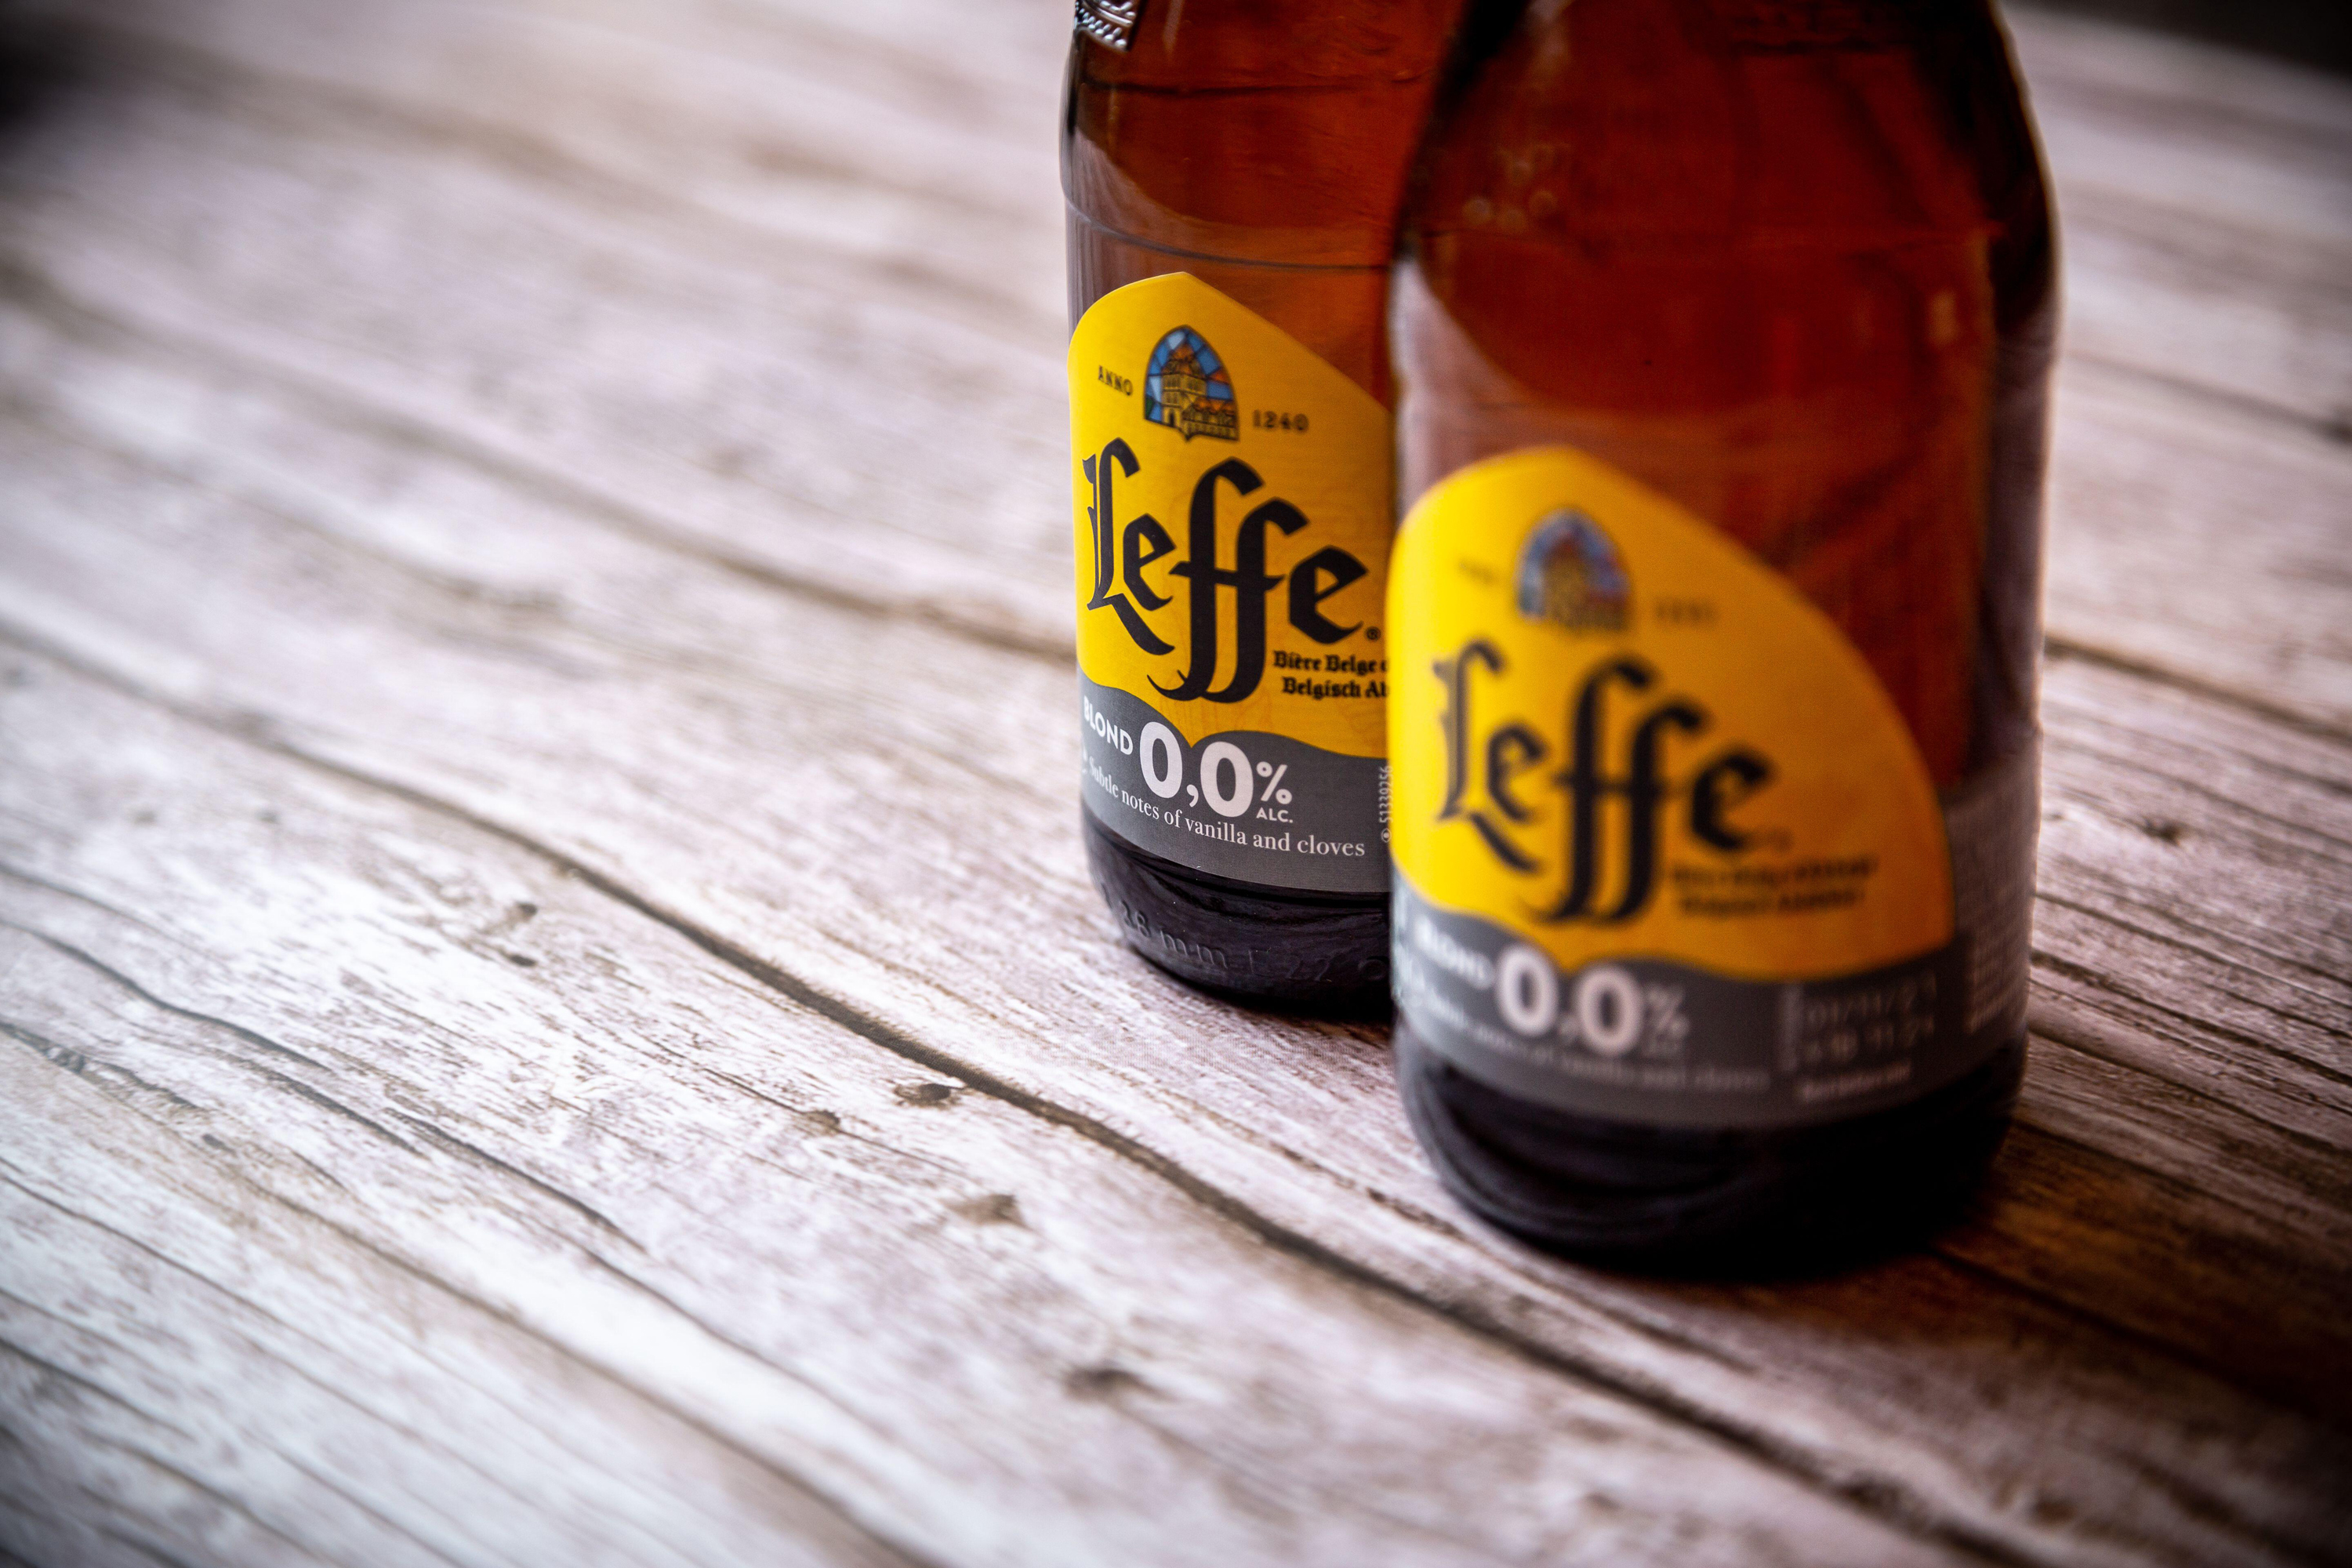 A close up of the labels of leffe zero alcohol beer bottles